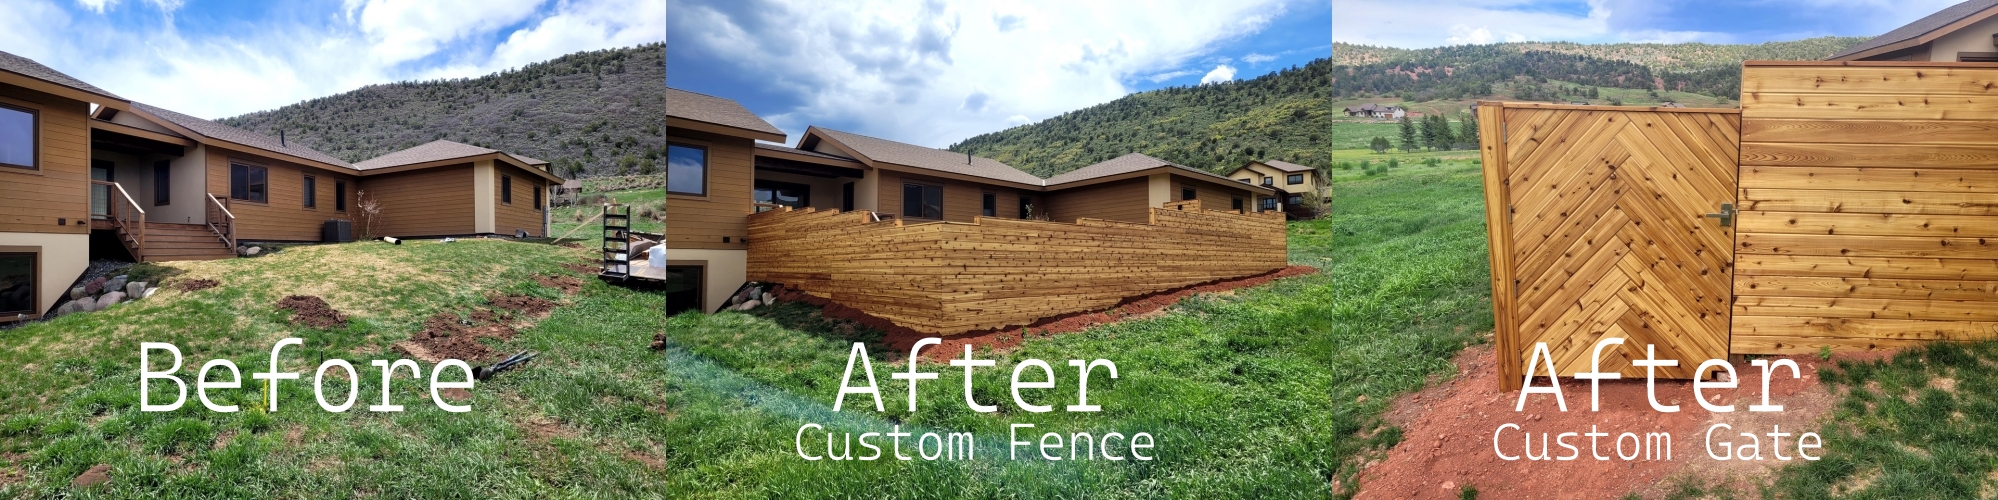 Custom Fence and Gate Before and After